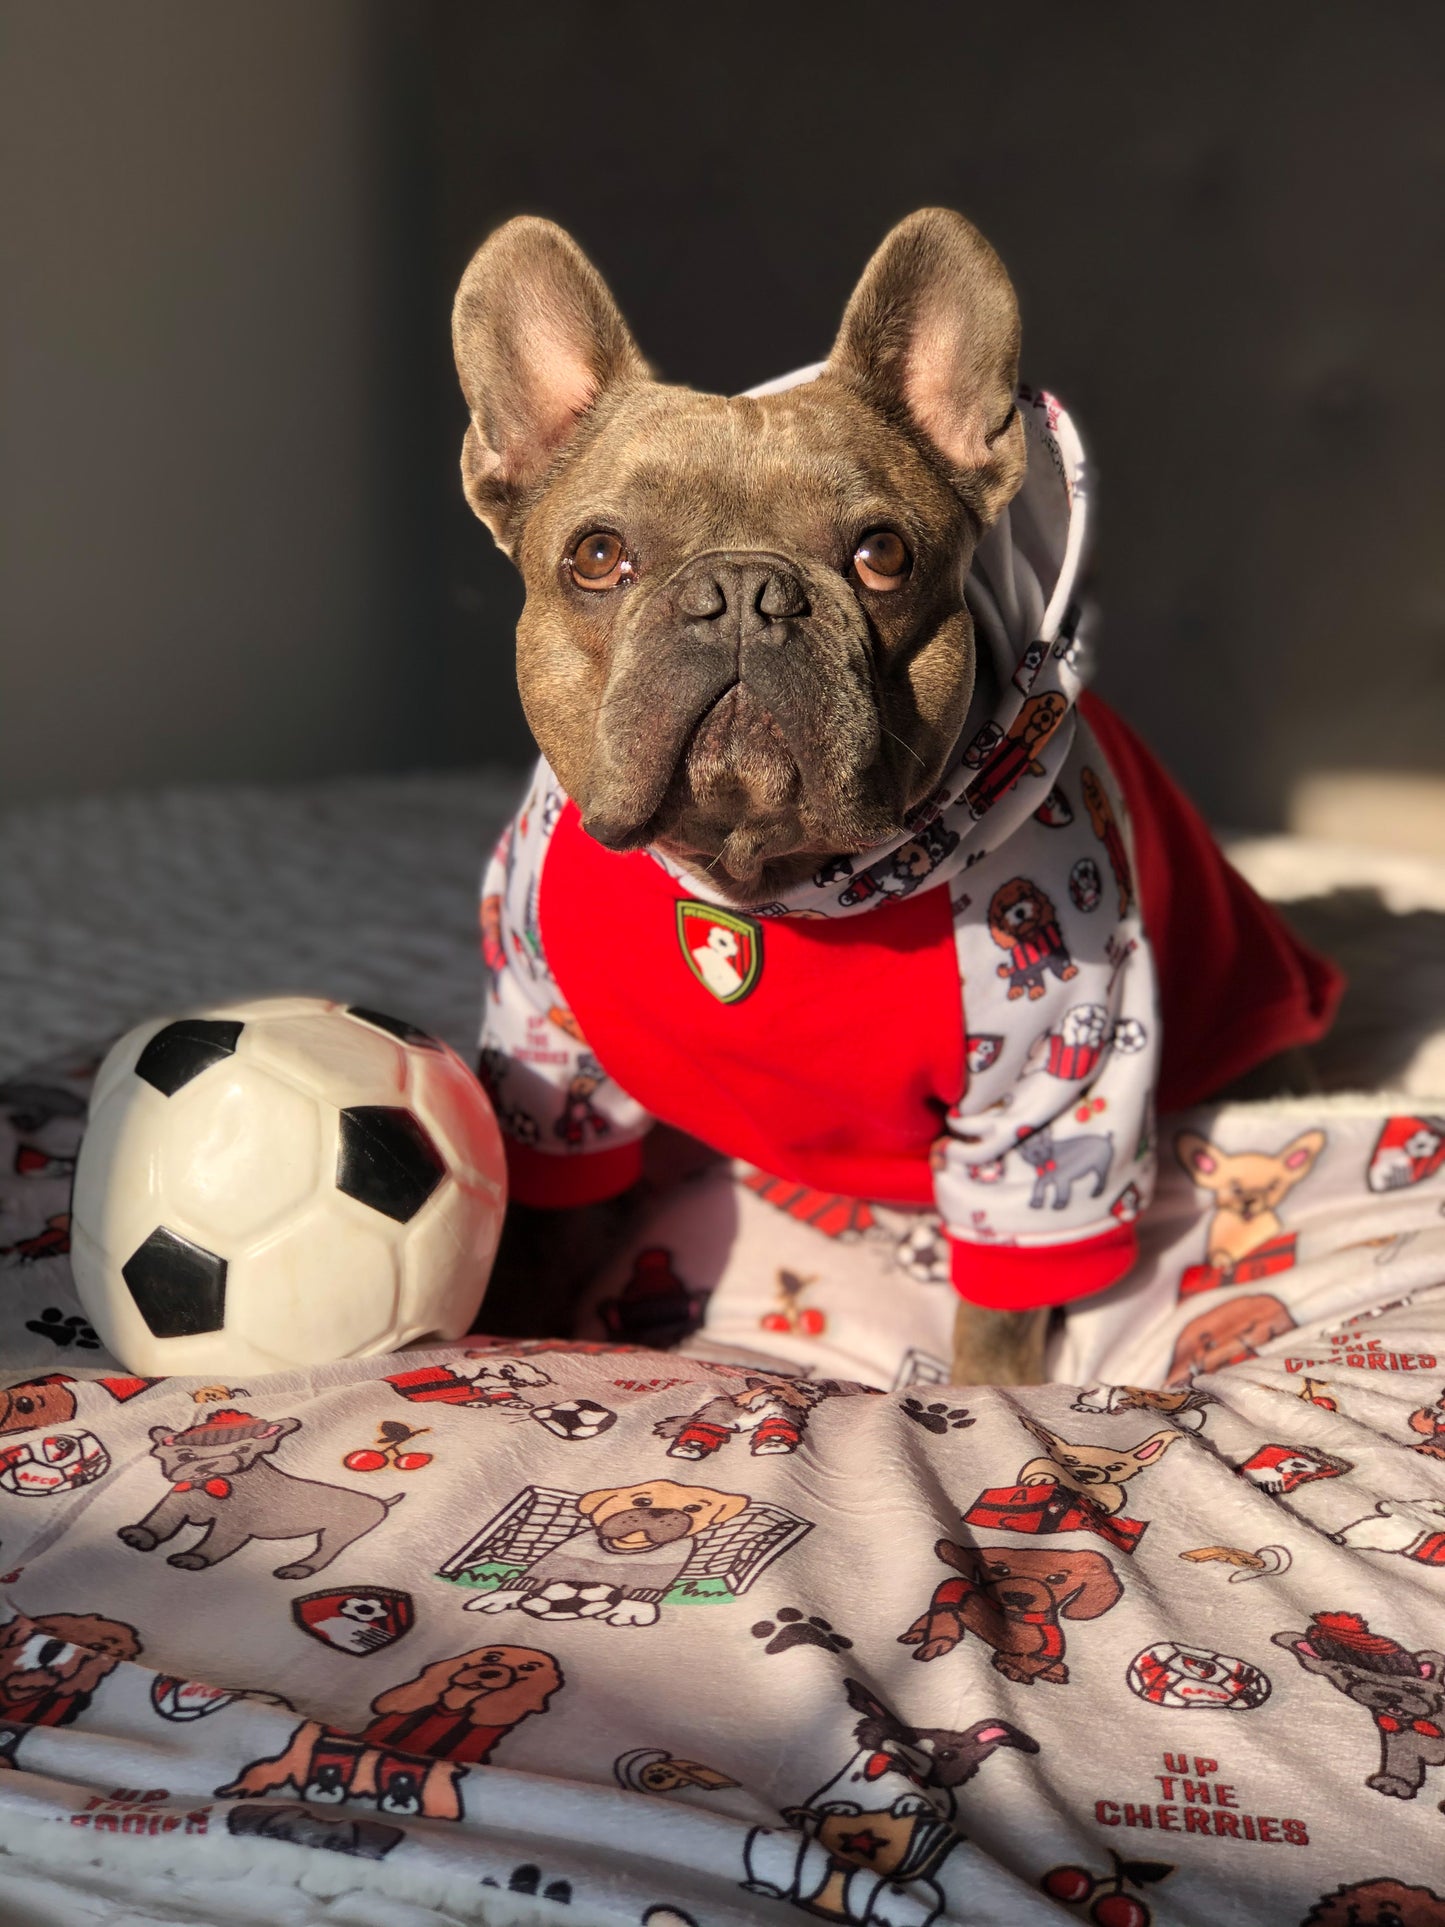 The AFC Bournemouth Dog Blanket